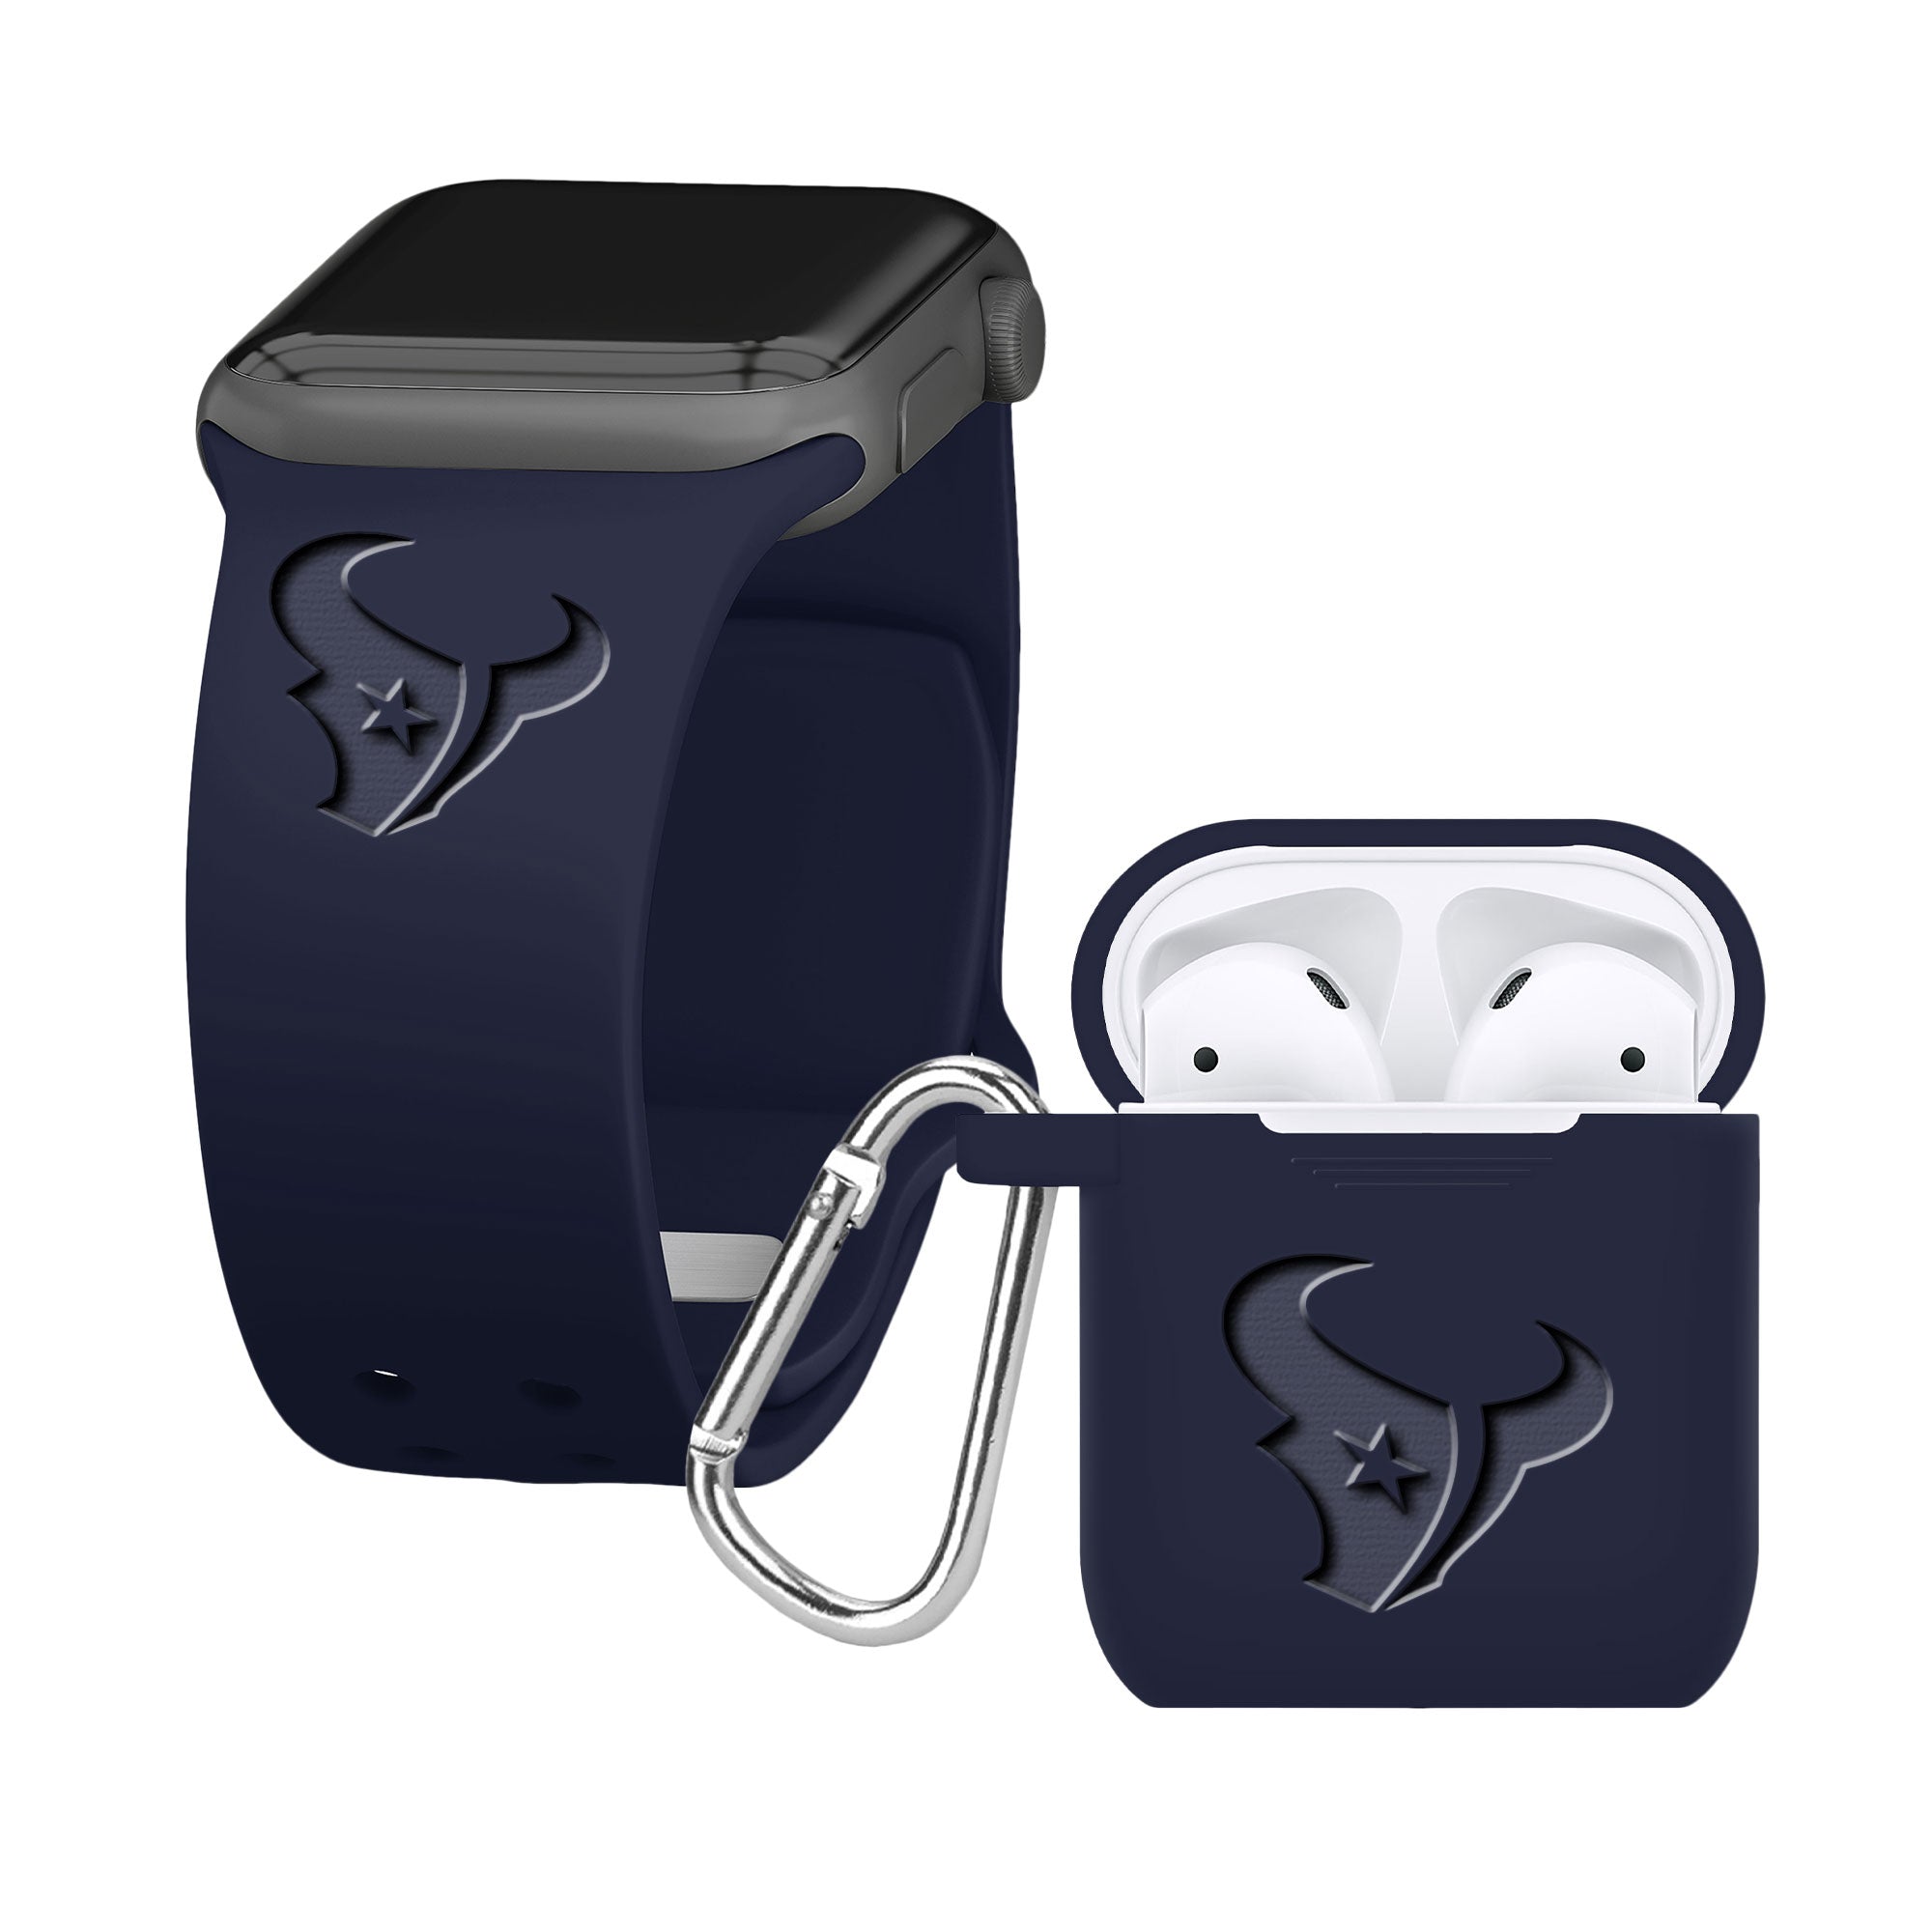 Game Time Houston Texans Engraved Apple Combo Package